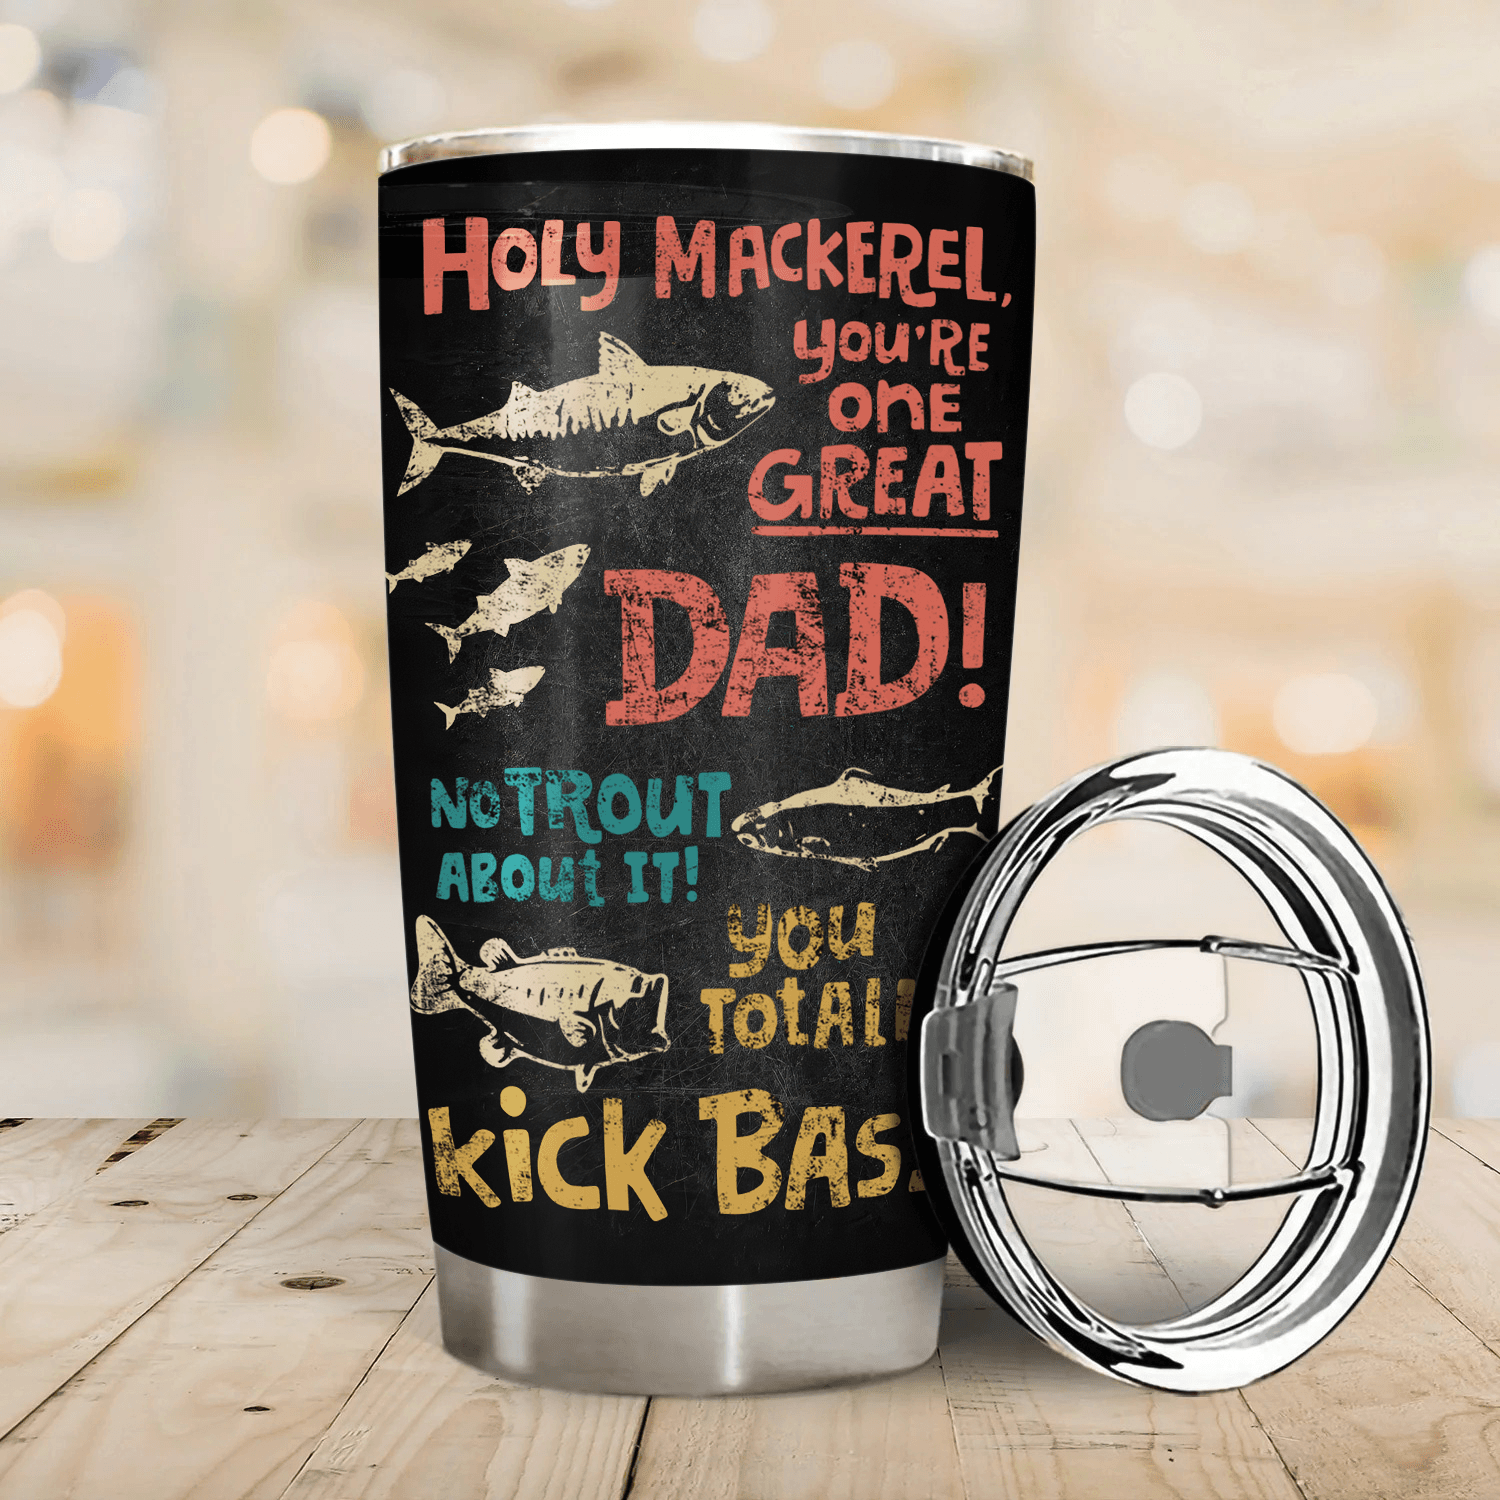 We Hooked The Best Dad Raised Fist Bump - Personalized Custom 20oz Fat Tumbler Cup - Father's Day Funny Gift for Dad, Grandpa, Daddy, Dada, Husband, Fishing, Reel Cool Dad - Suzitee Store